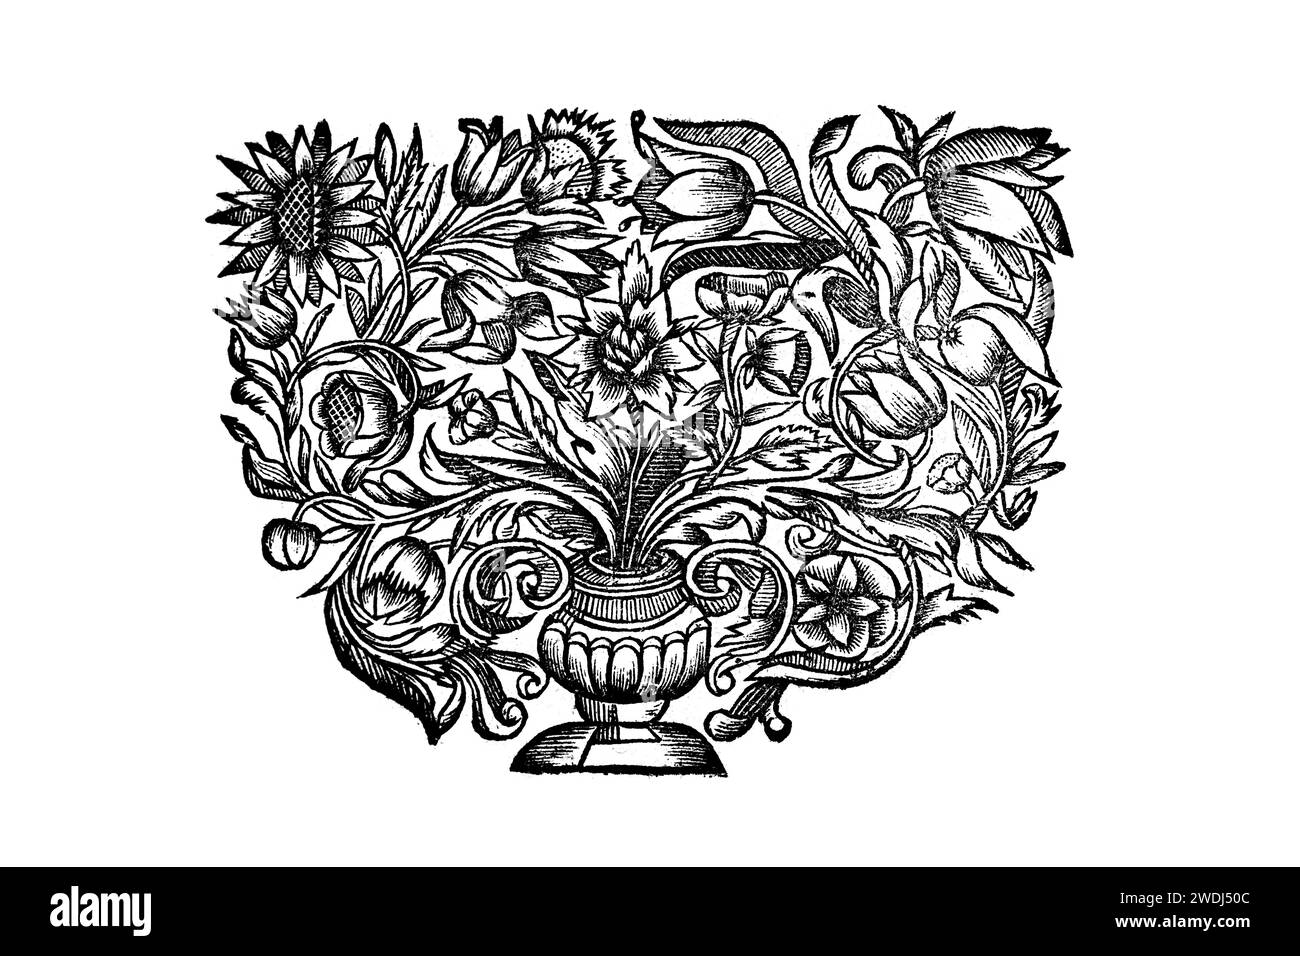 Antique floral ilustration from an old book from 1700 Stock Photo